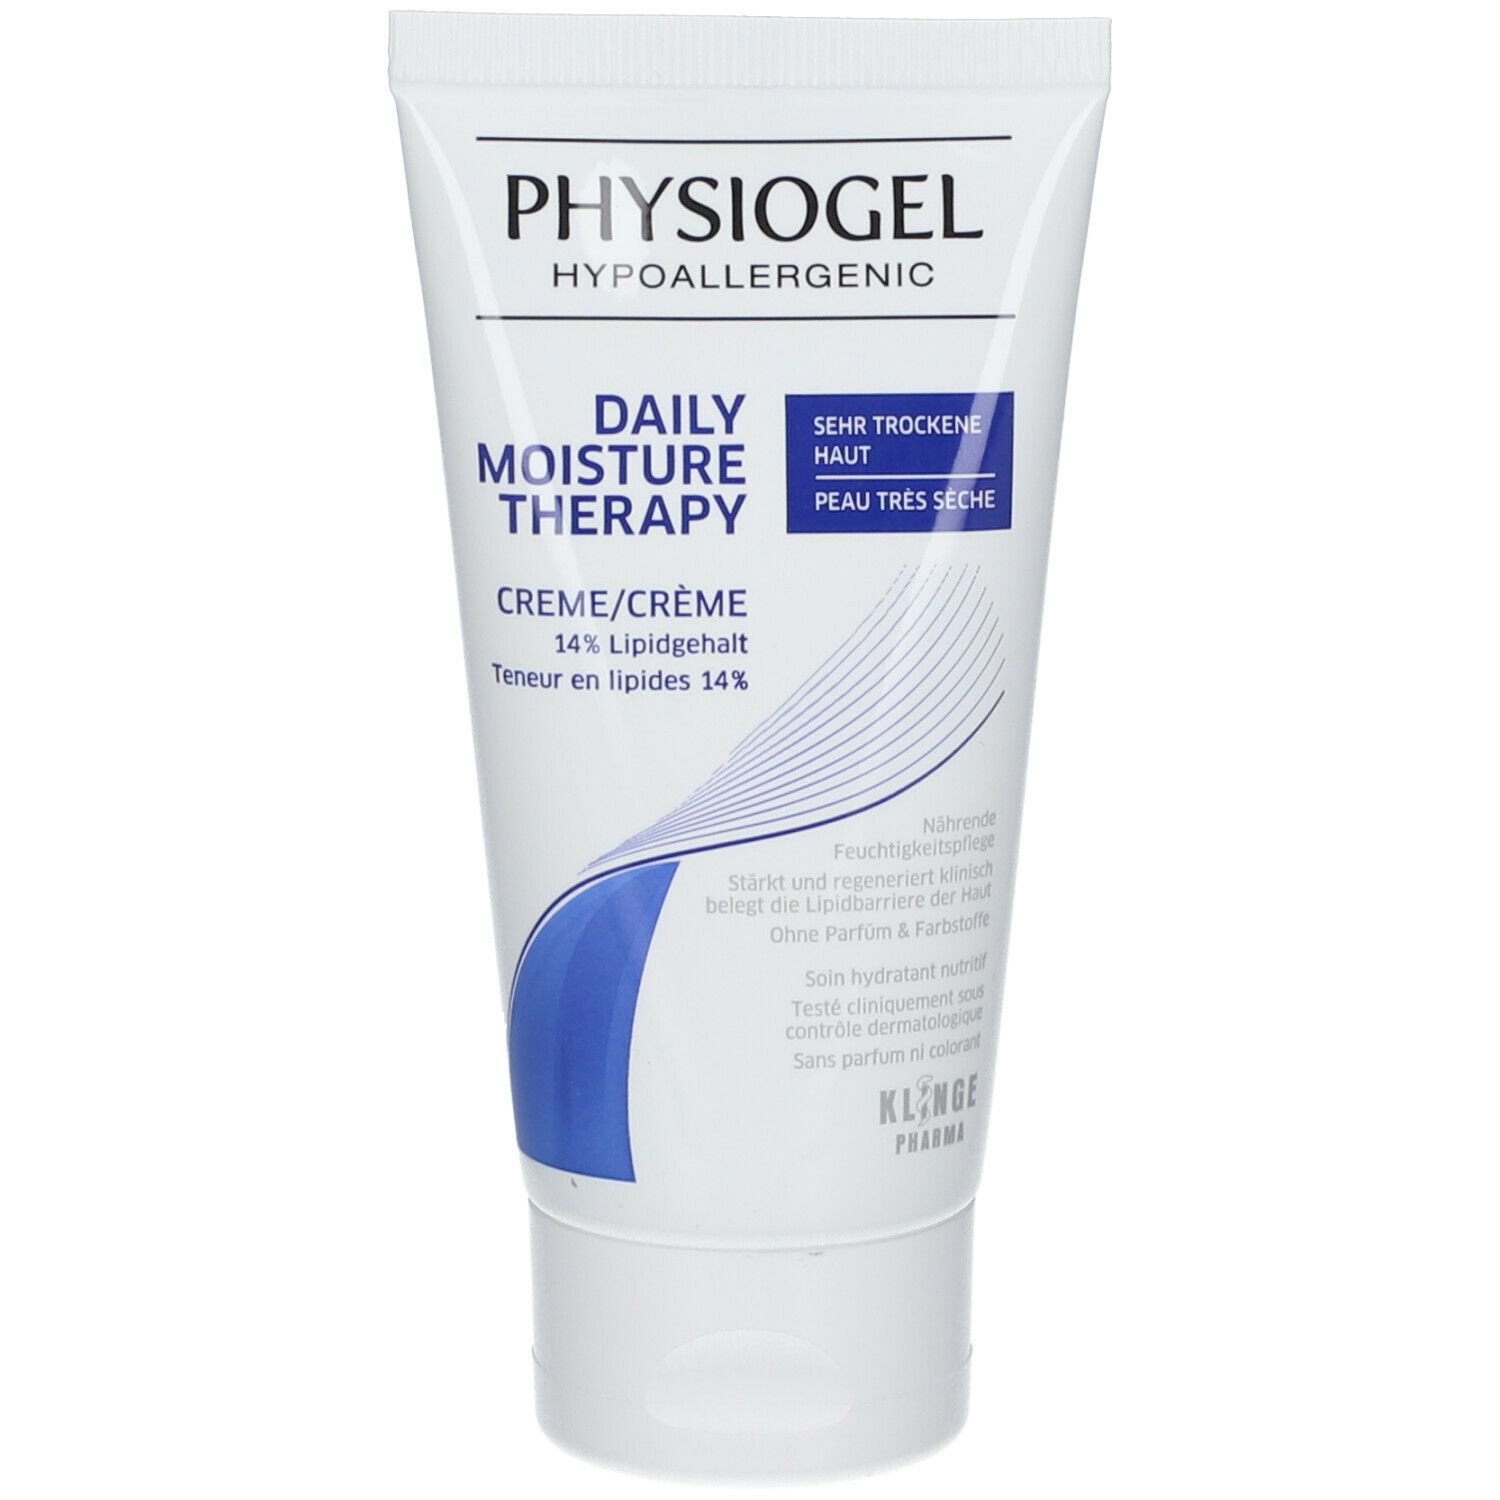 Image of Physiogel Daily Moisture Therapy Creme Sehr trockene Haut